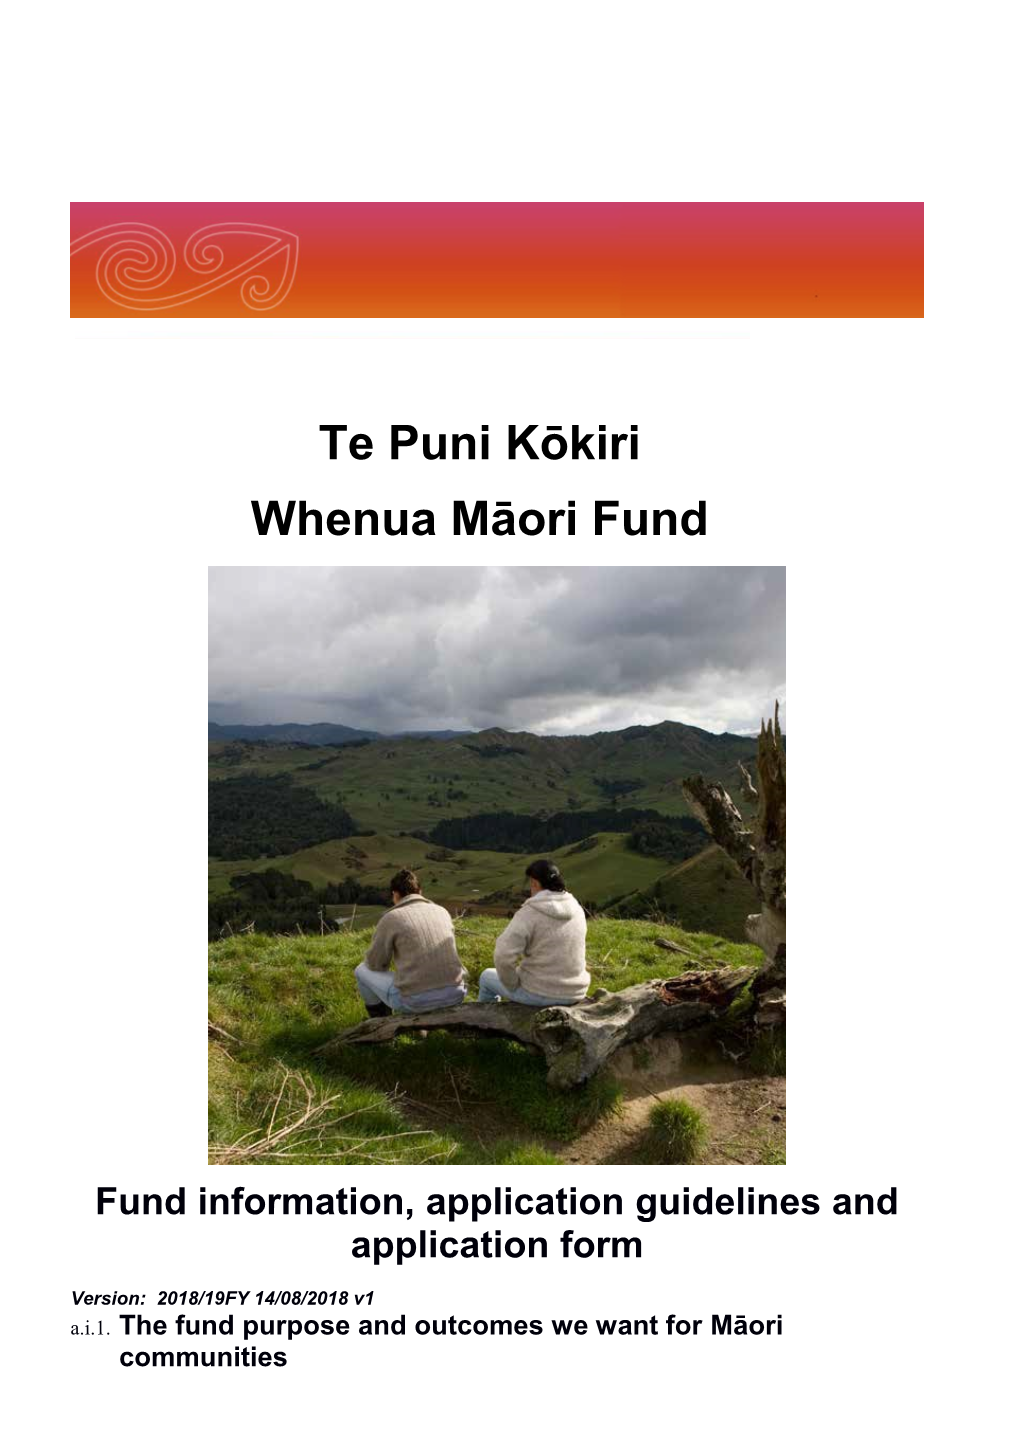 Fund Information, Application Guidelines and Application Form